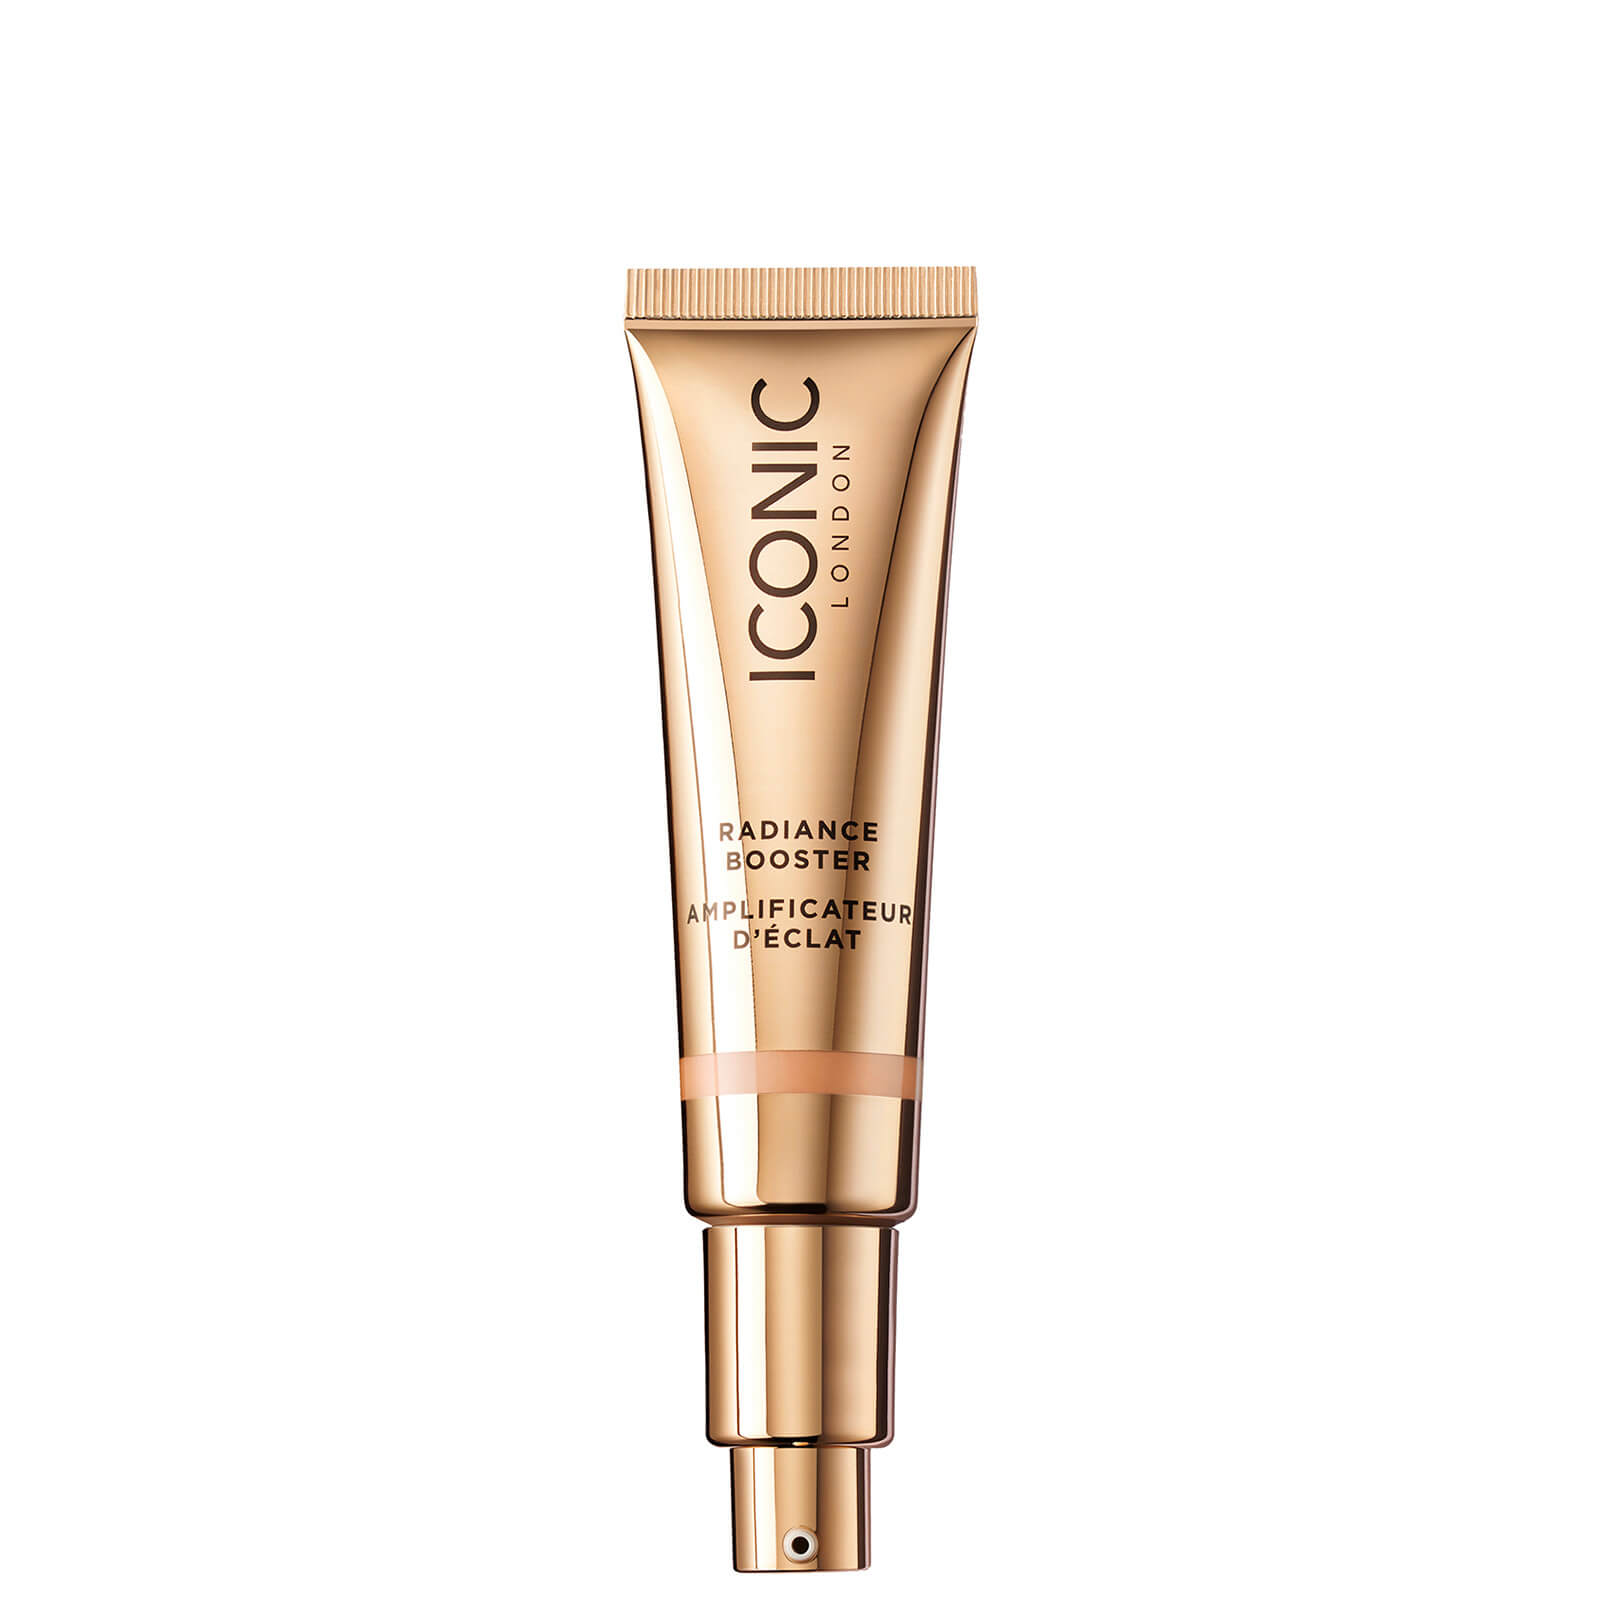 ICONIC London Radiance Booster 30ml (Various Shades) - Champagne Glow